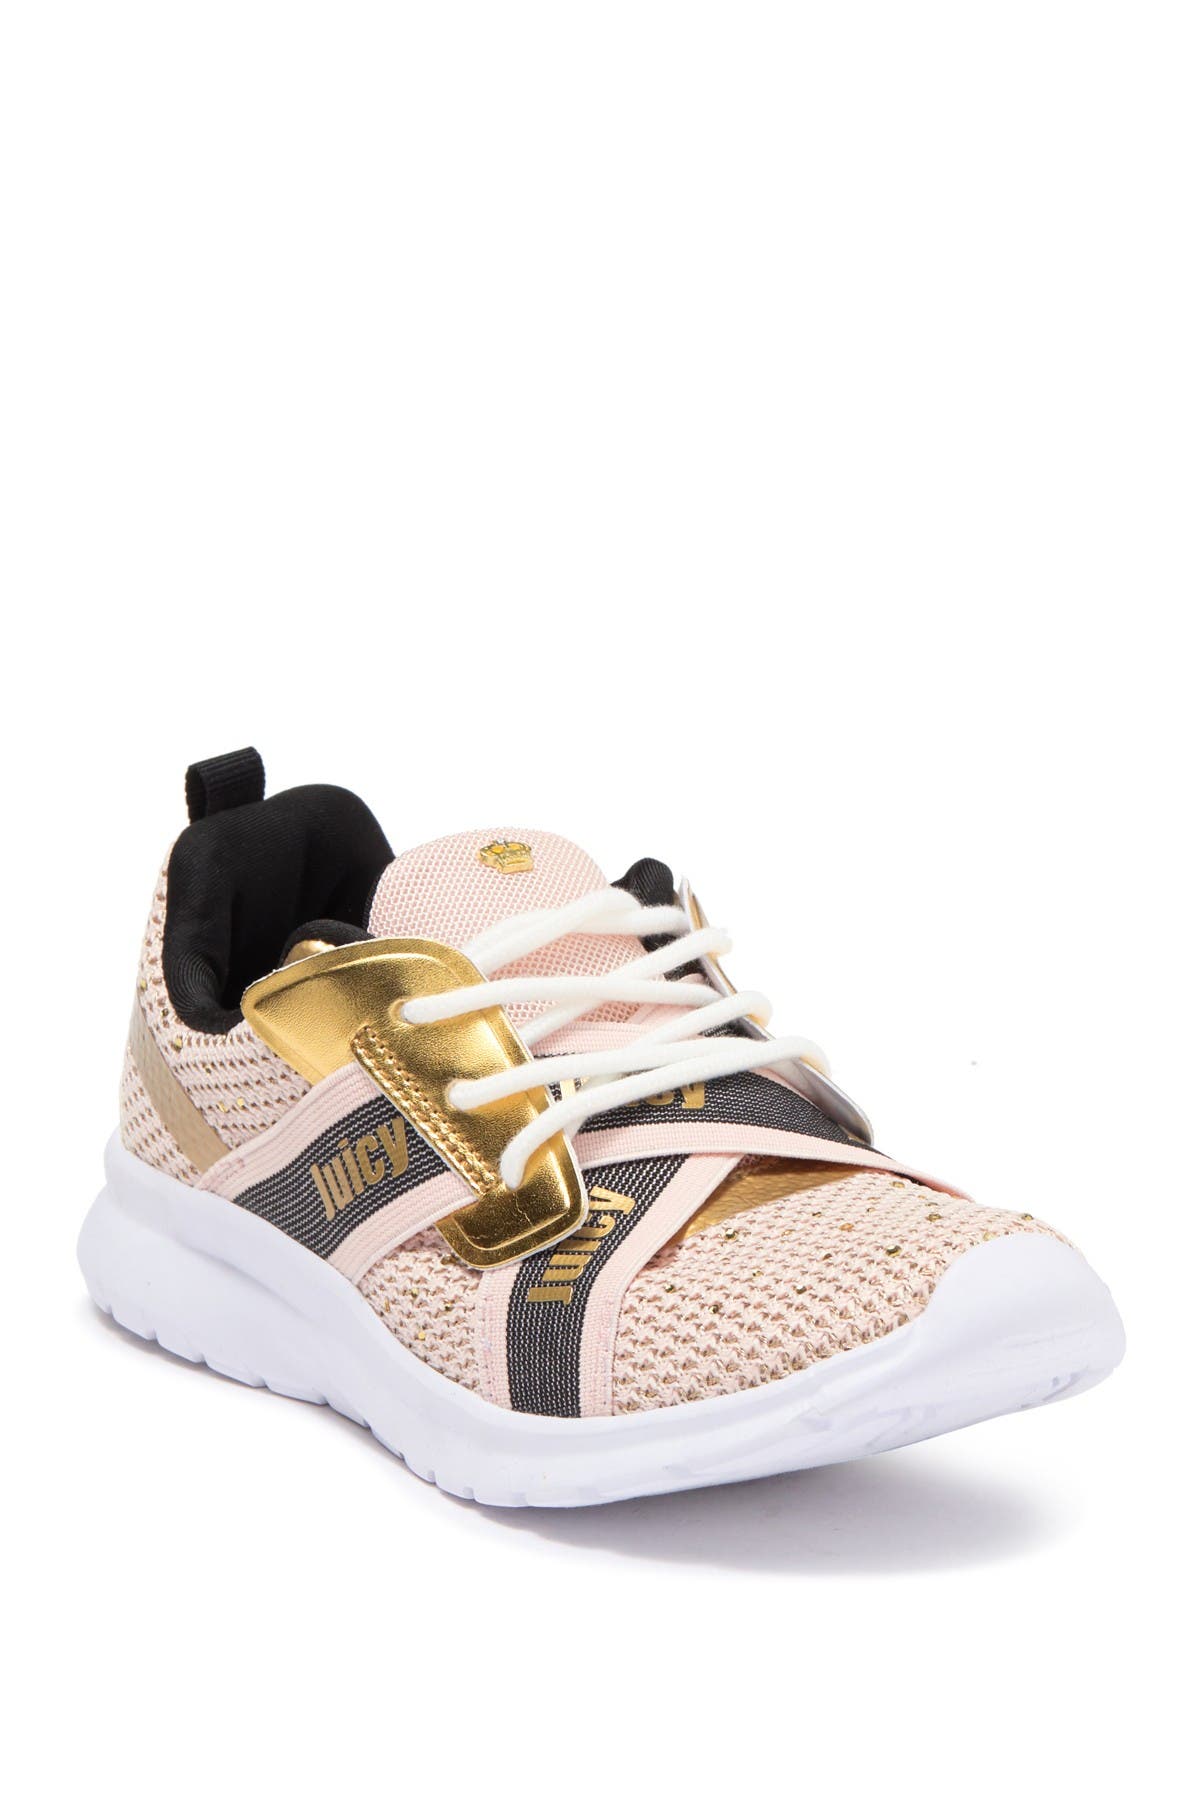 juicy couture tennis shoes